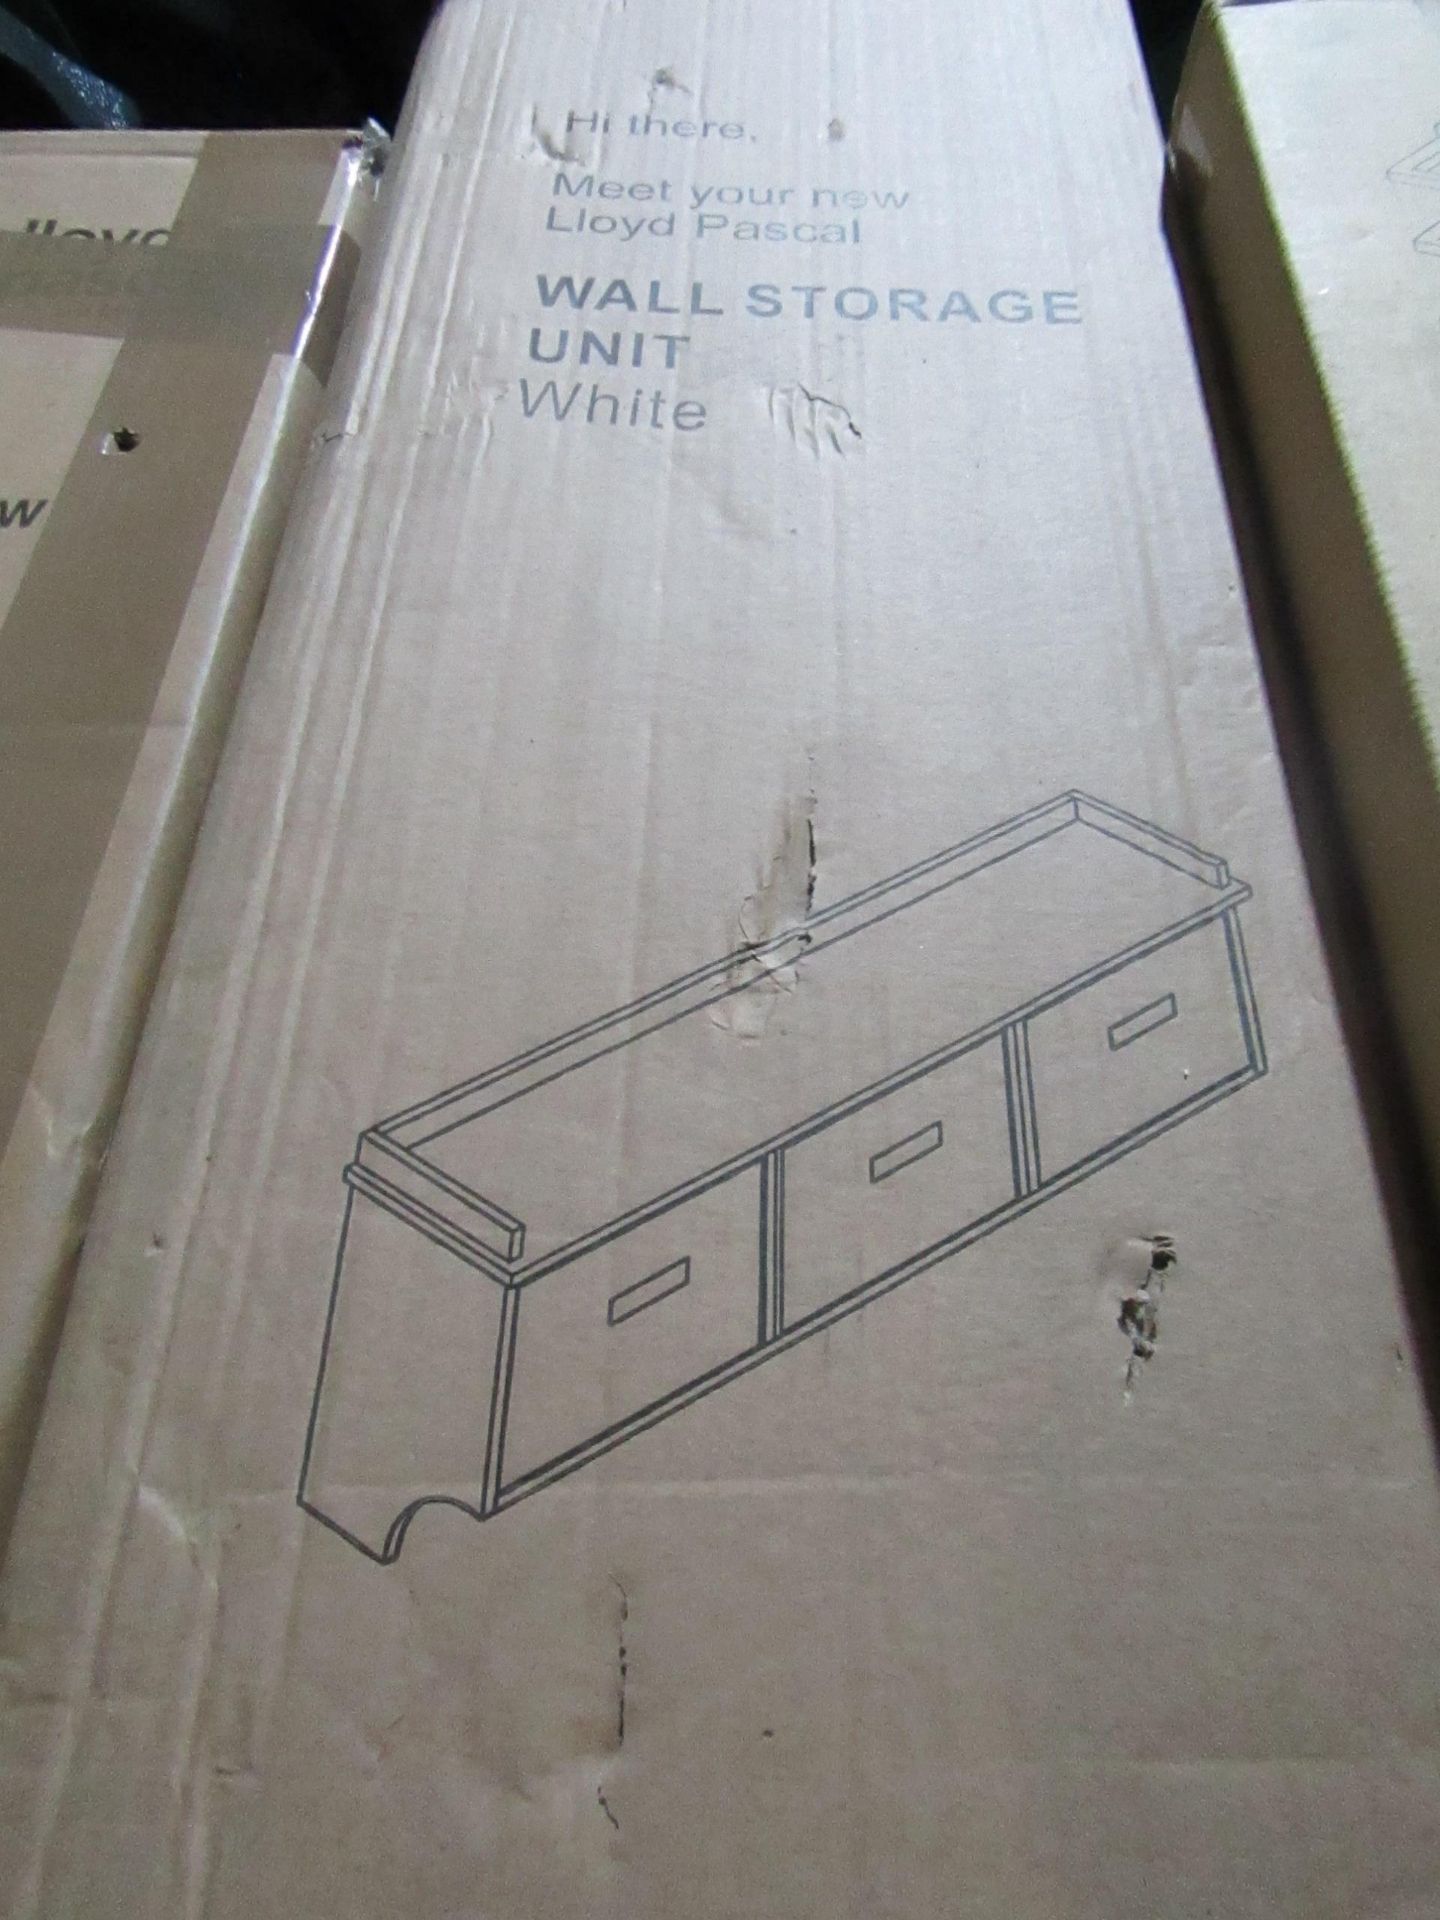 Lloyd Pascal - White Wall Storage Unit - Unchecked & Boxed.